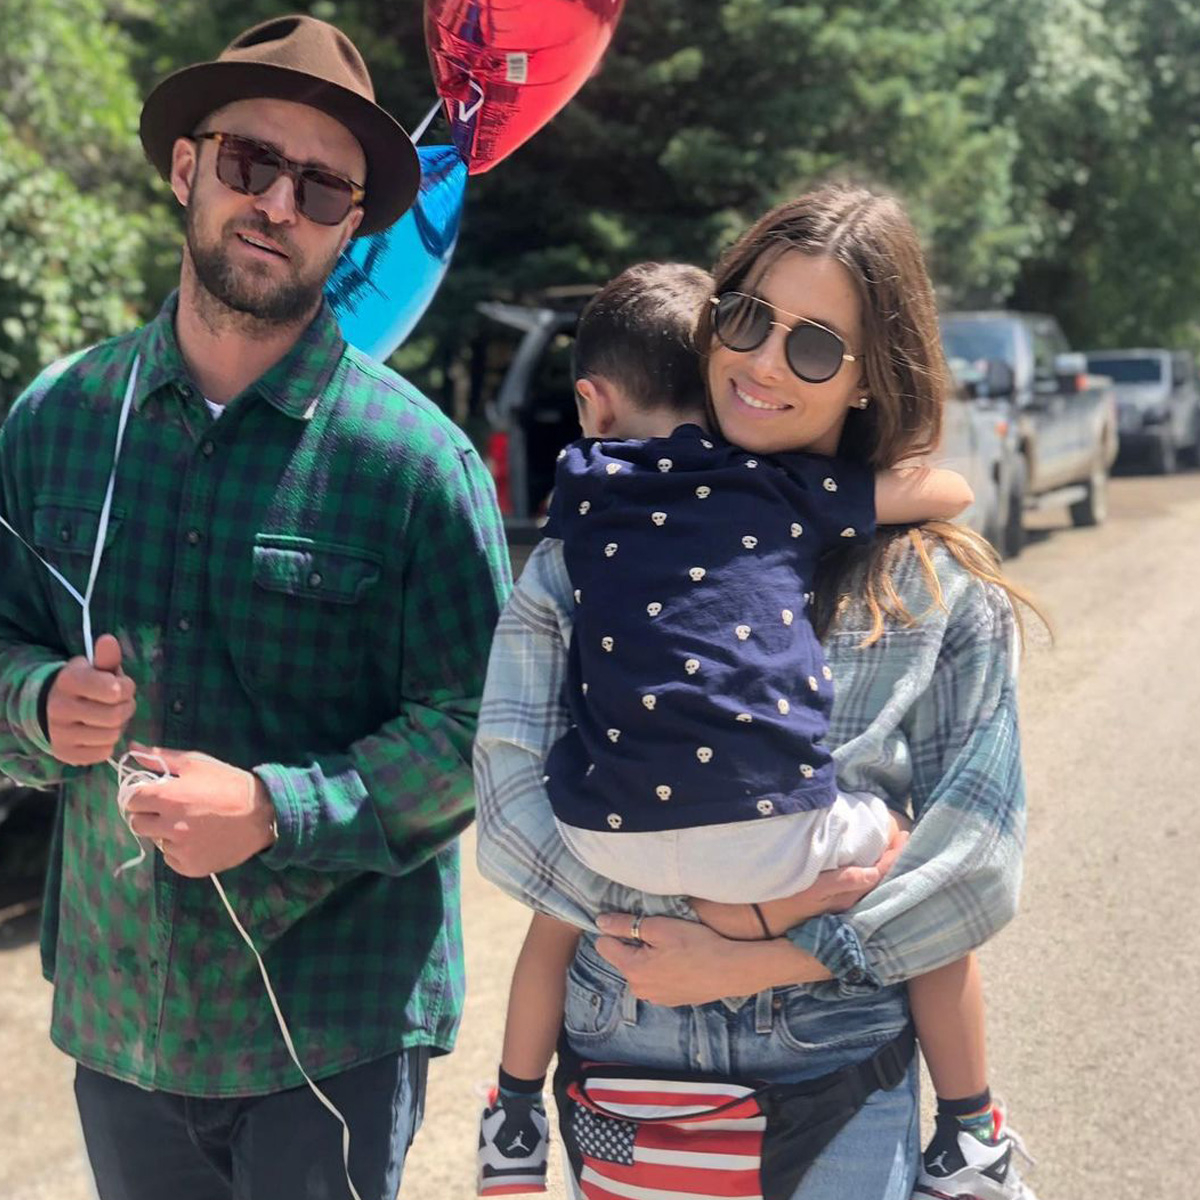 What We Know About Justin Timberlake And Jessica Biel's Son, Silas